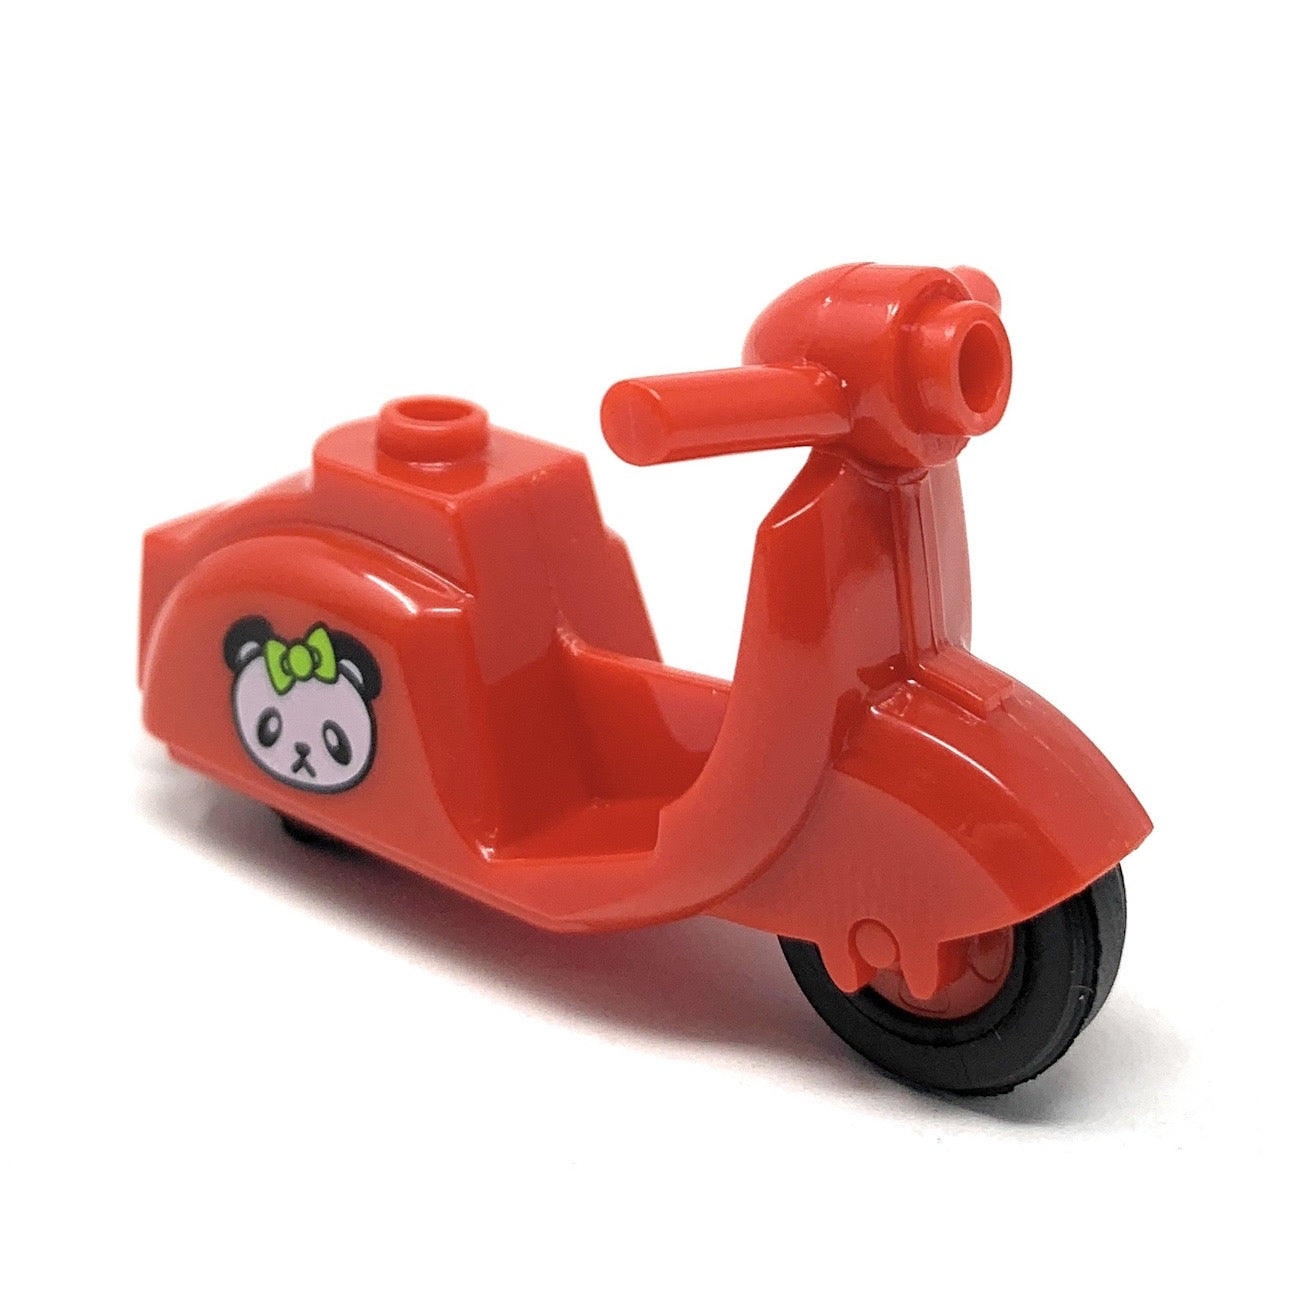 Scooter (Red, Pouty Panda) - BrickForge Pack